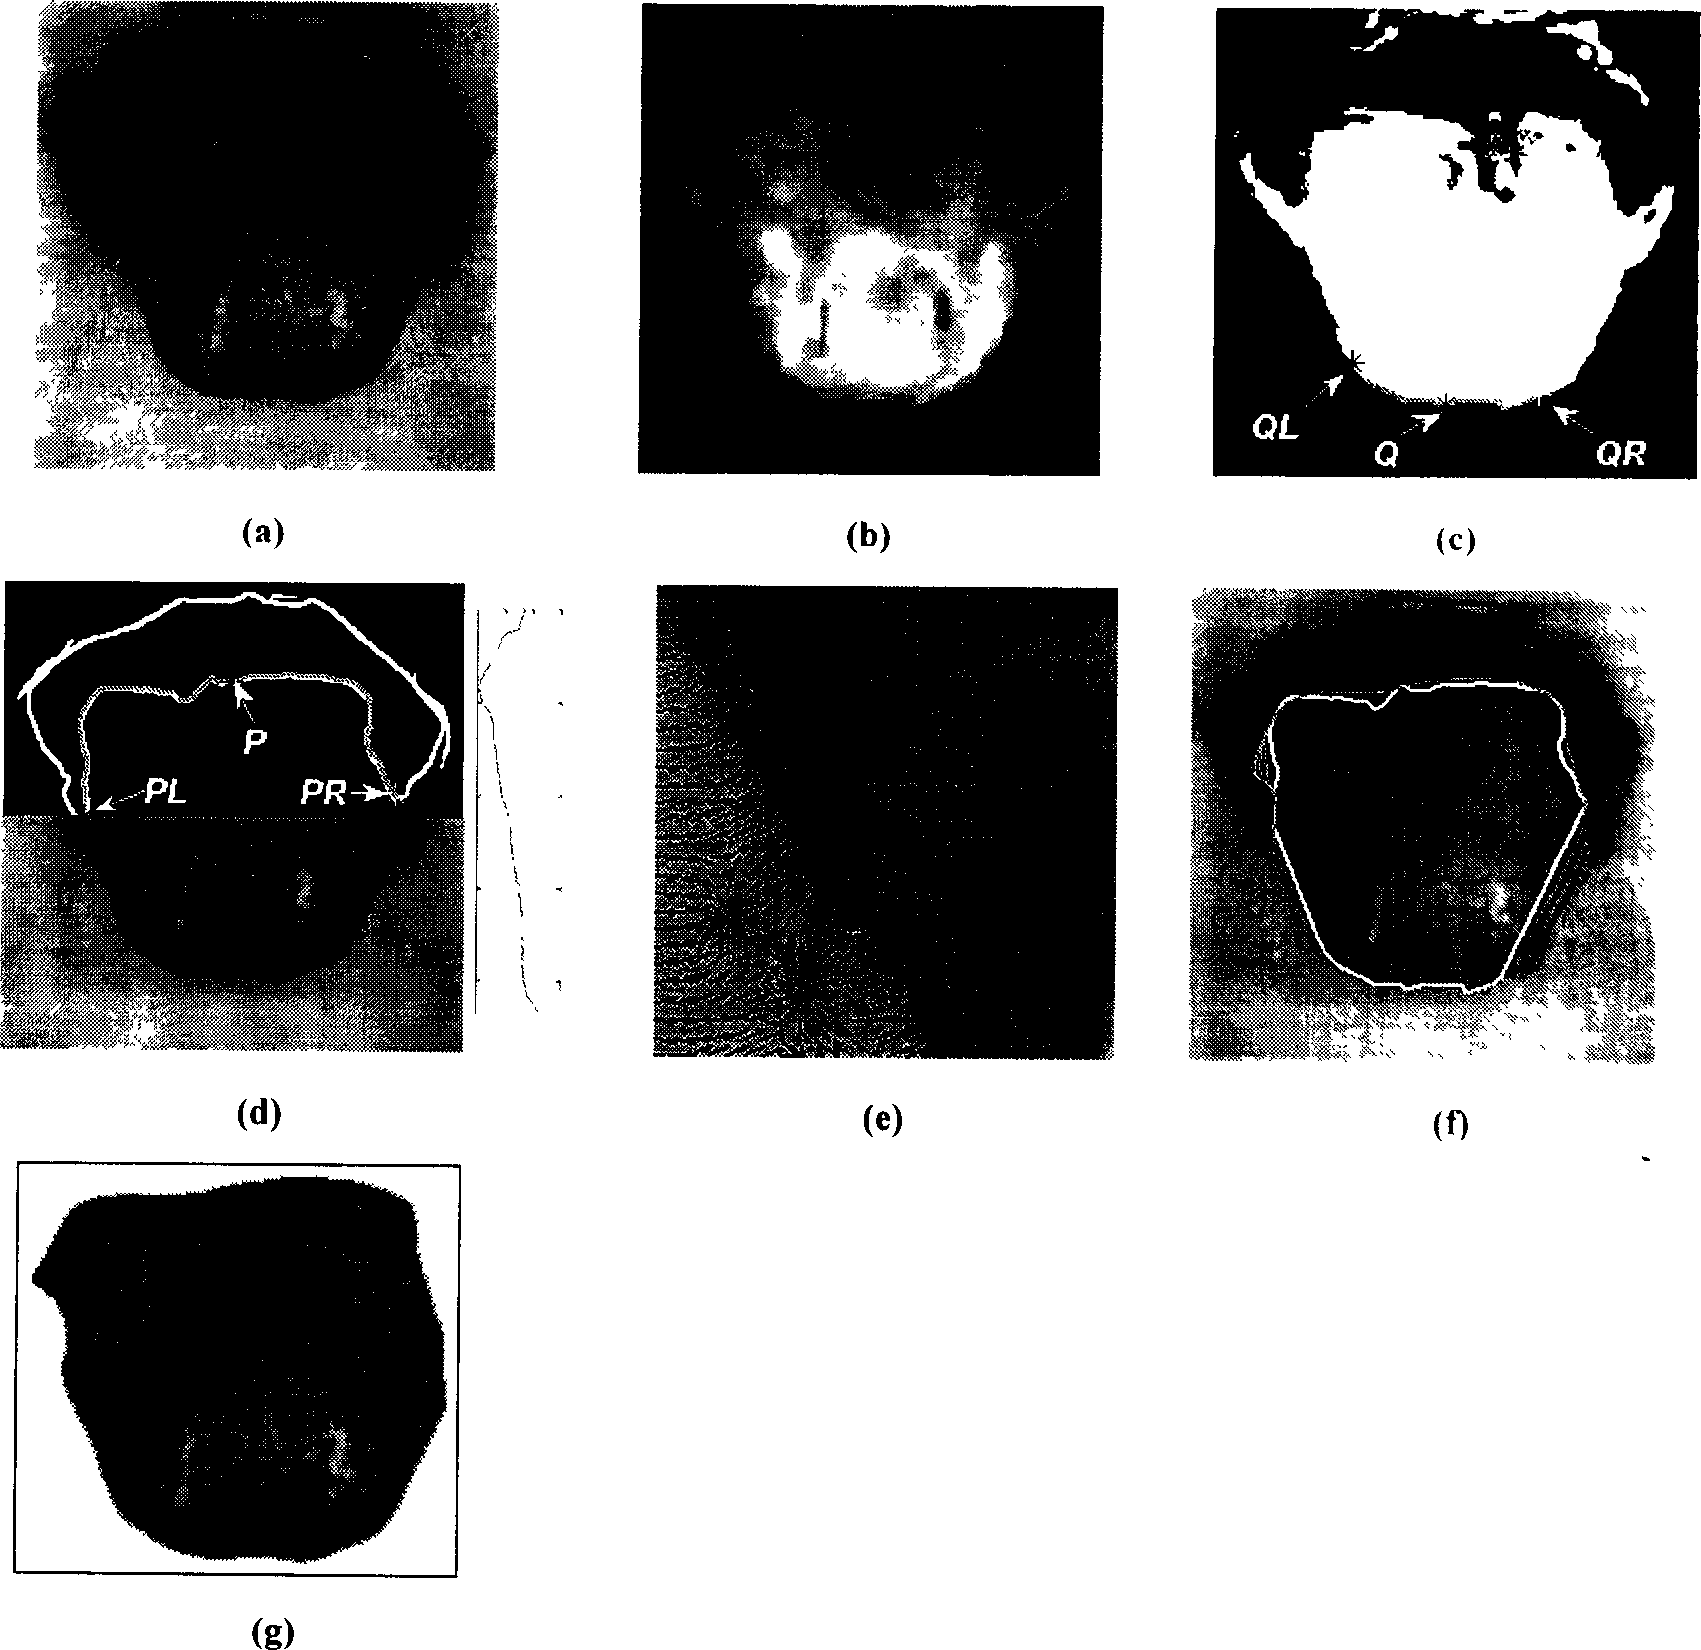 Method for extracting tongue body from tongue images